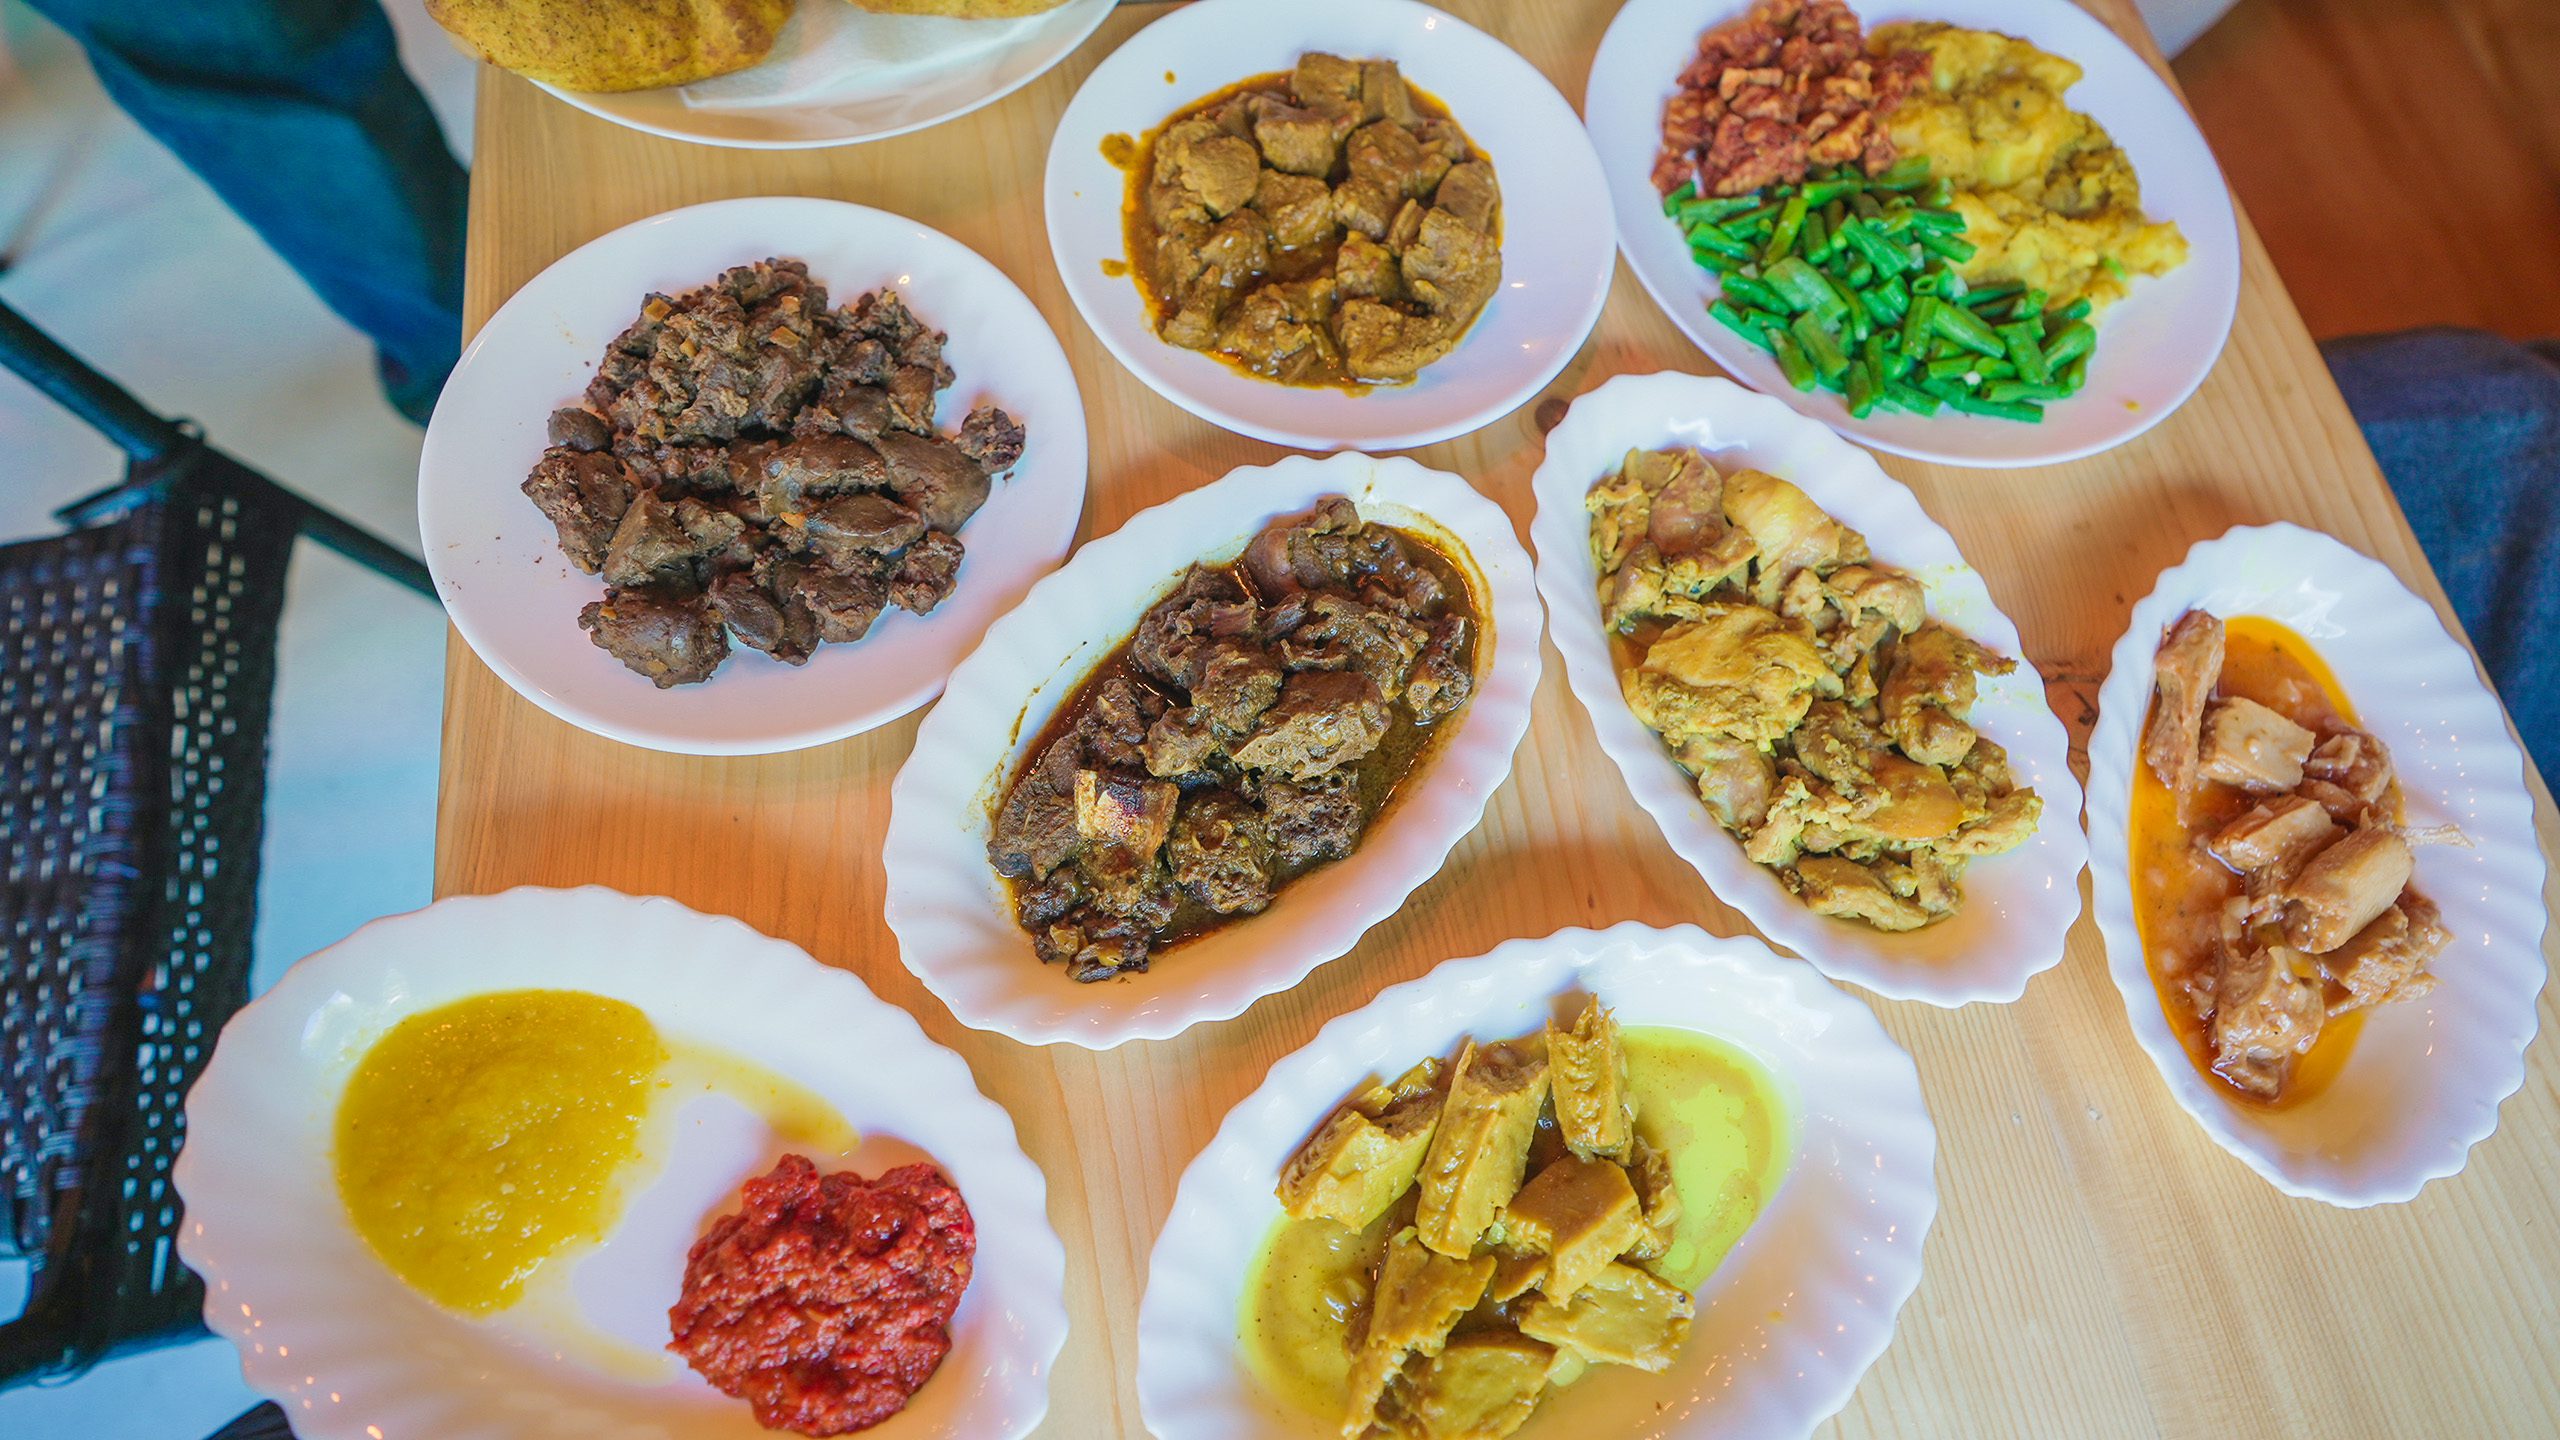 A spread of Suriname food in Rotterdam, the Netherlands | Davidsbeenhere